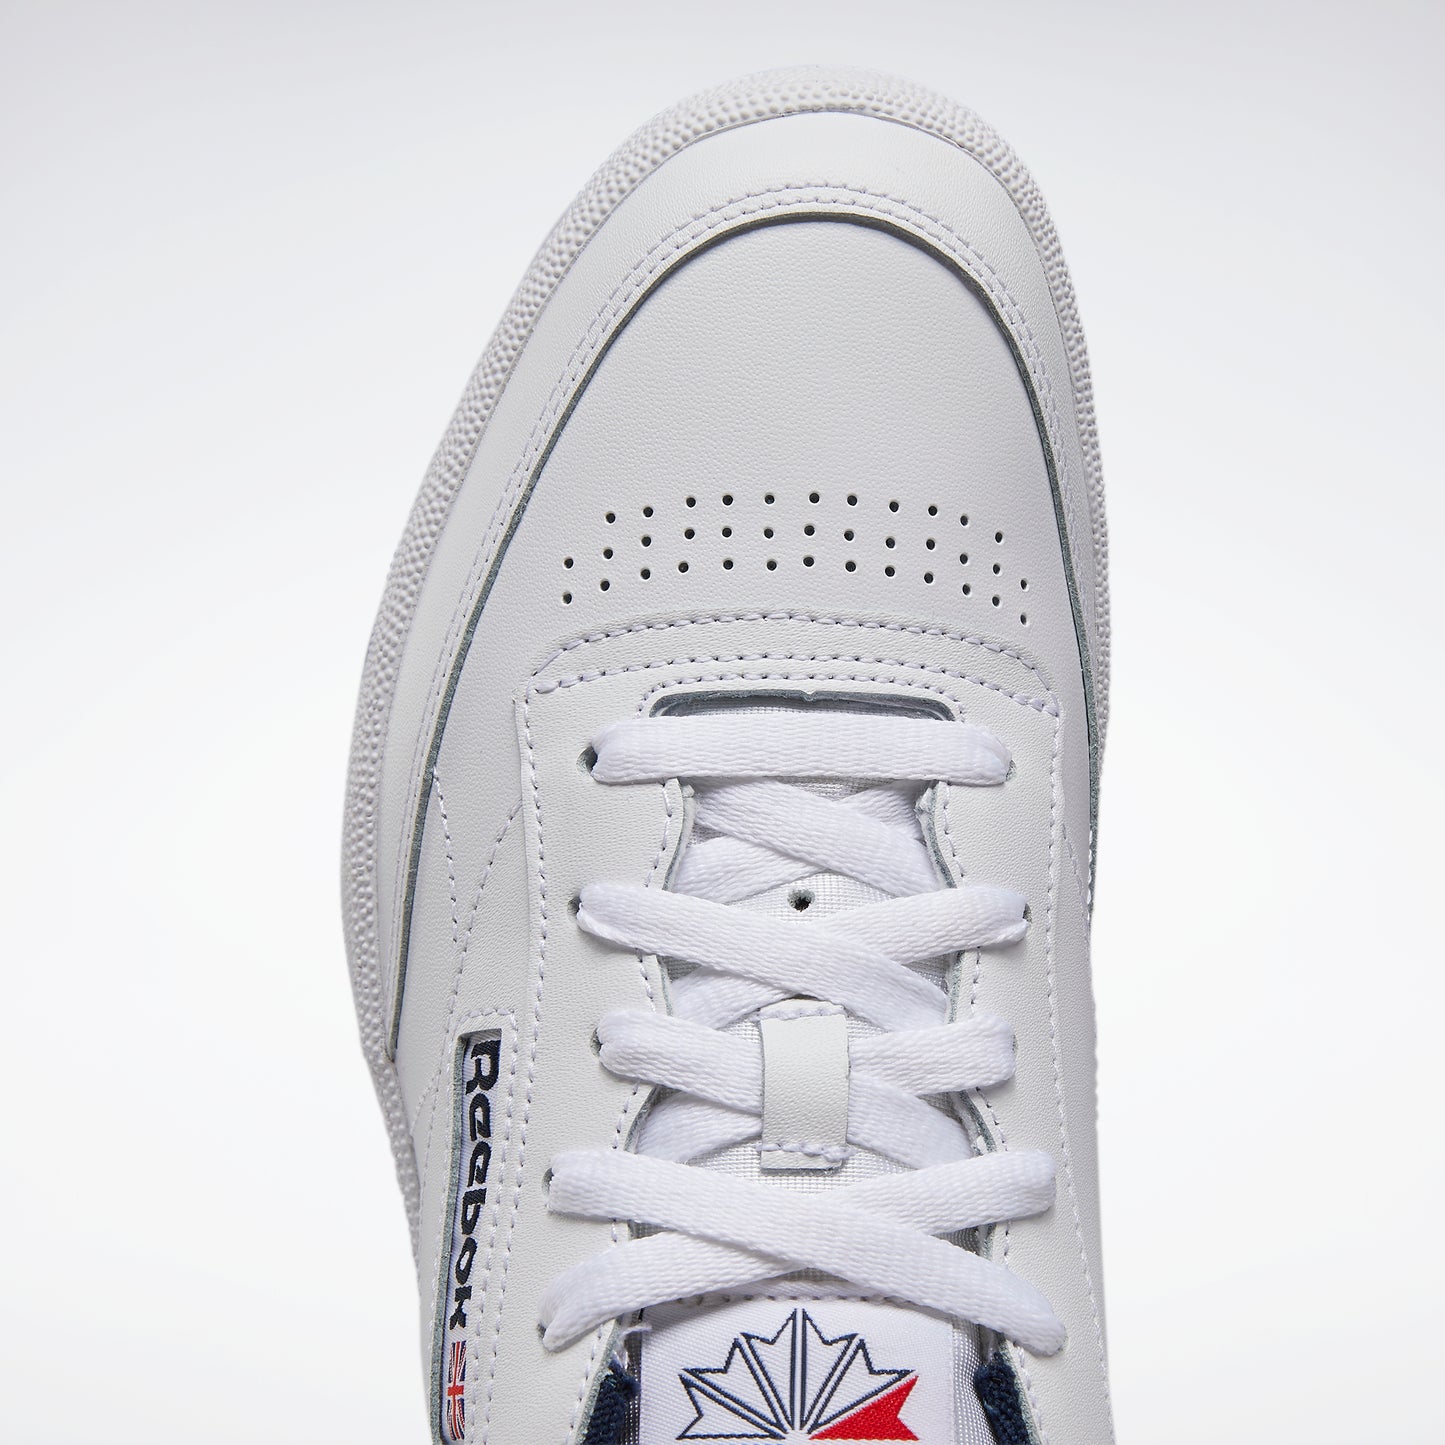 Club C 85 Shoes Int-White/Navy